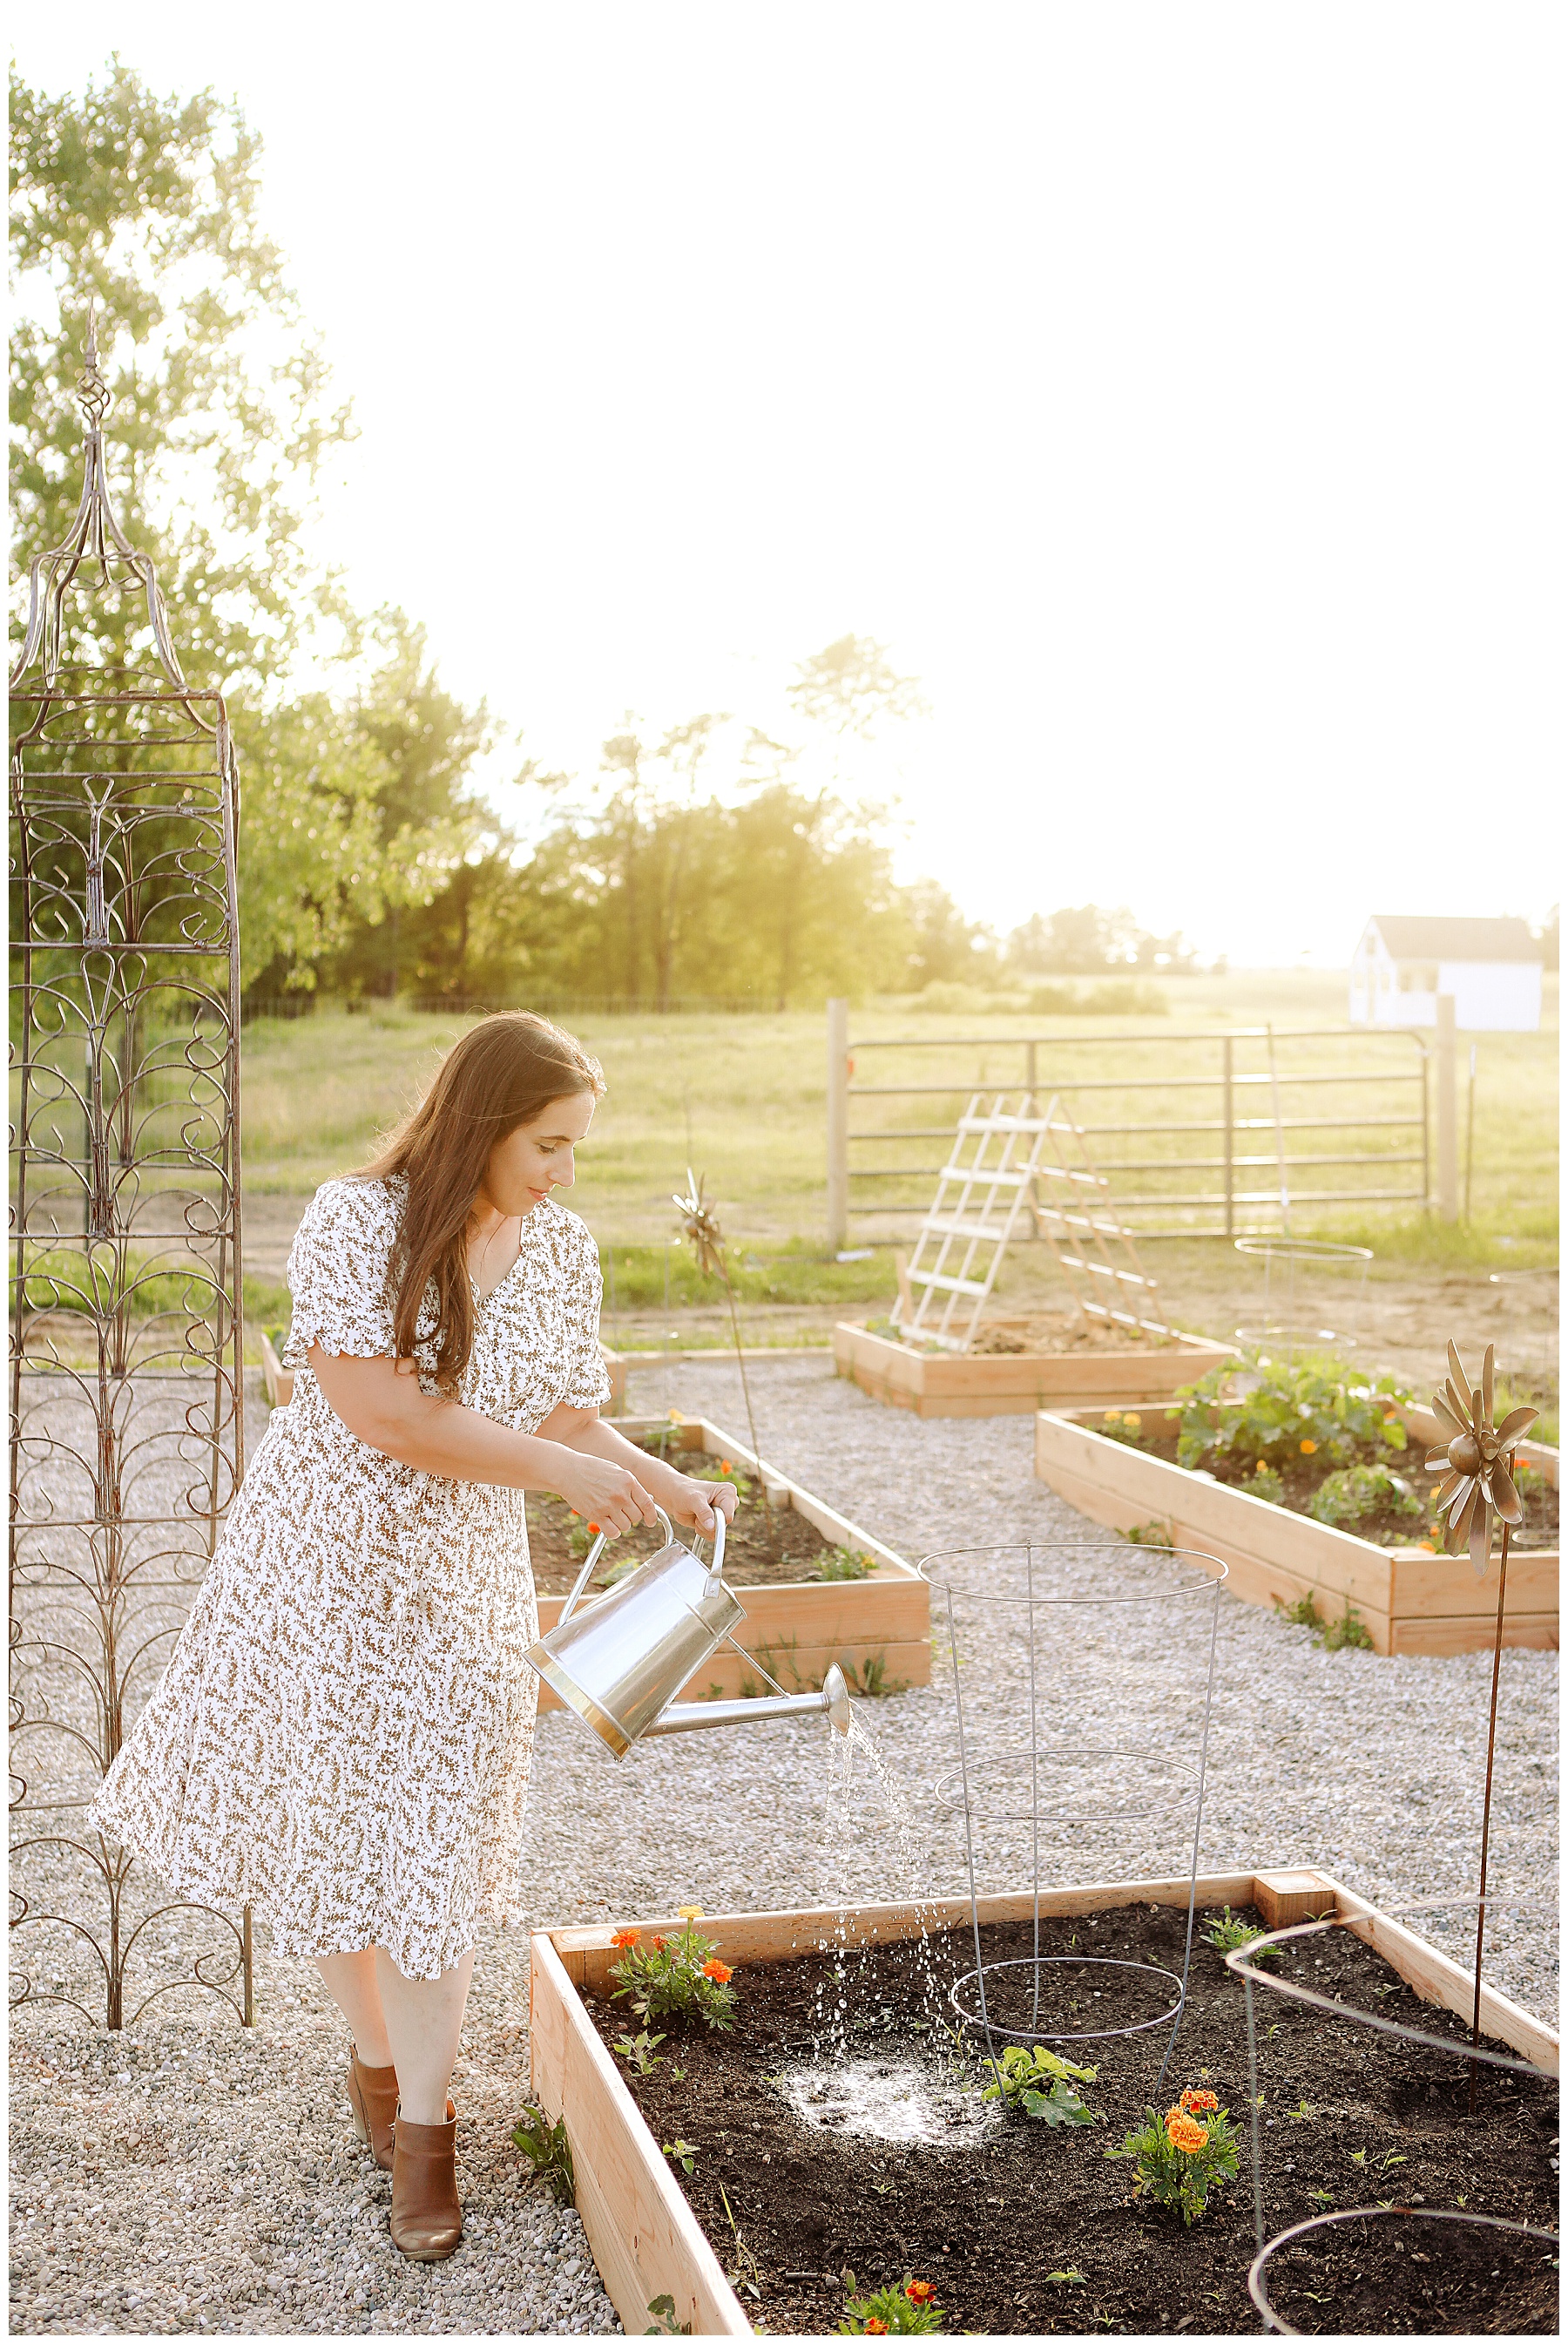 Tips for growing food organically